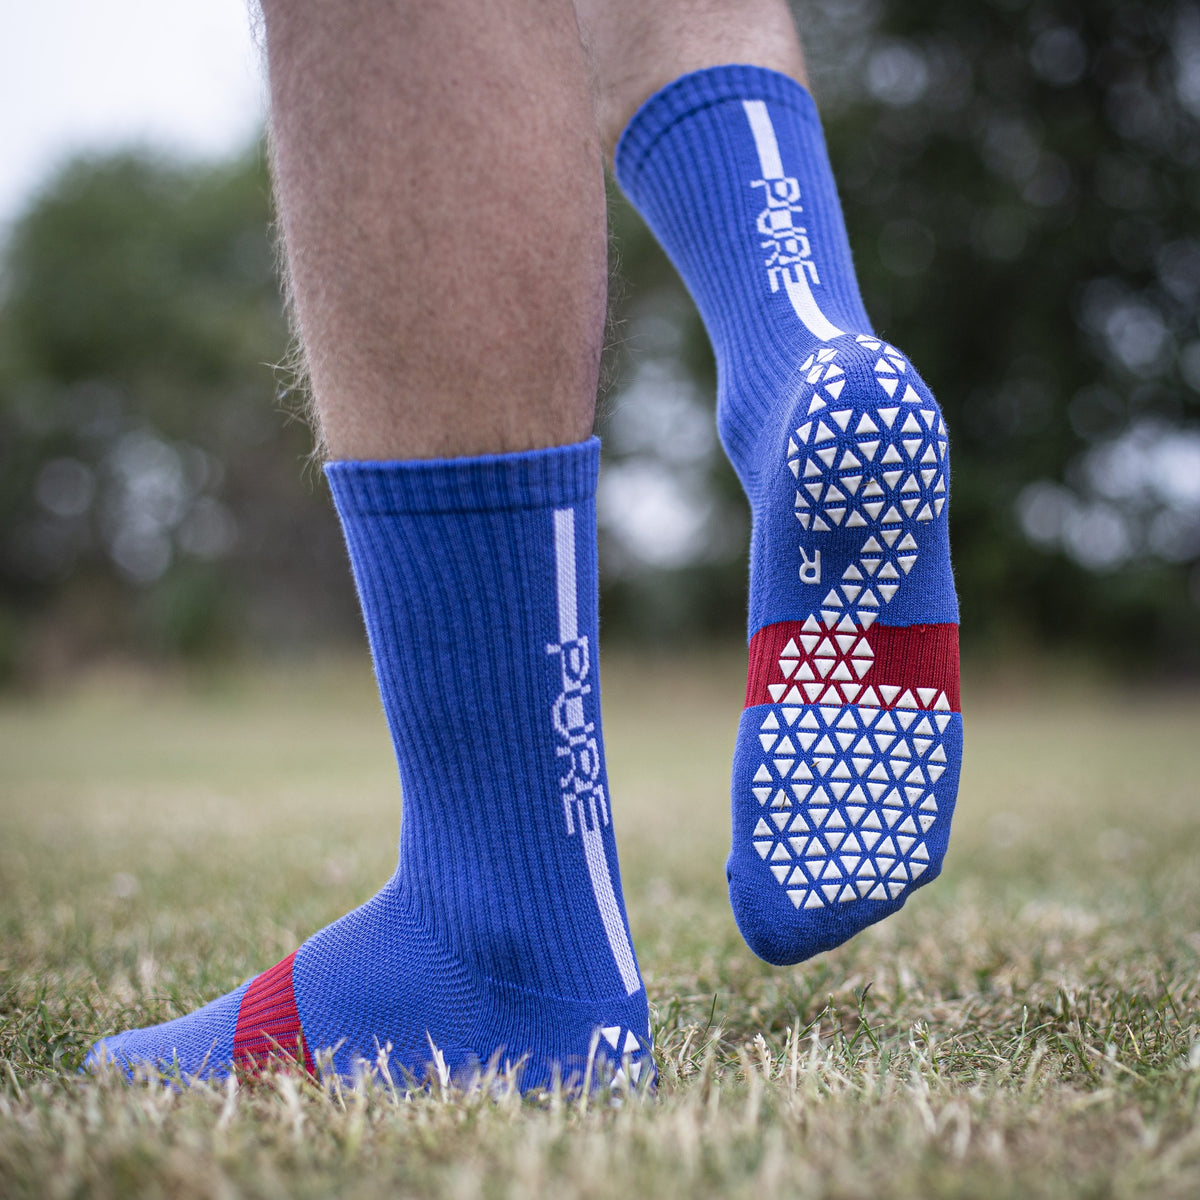 Pure Grip Socks - You know you want to⚡️Tag a friend or a team mate (or  yourself) whose sock/boot game is on point 🤩 If yours isn't, go get the Pure  Grip